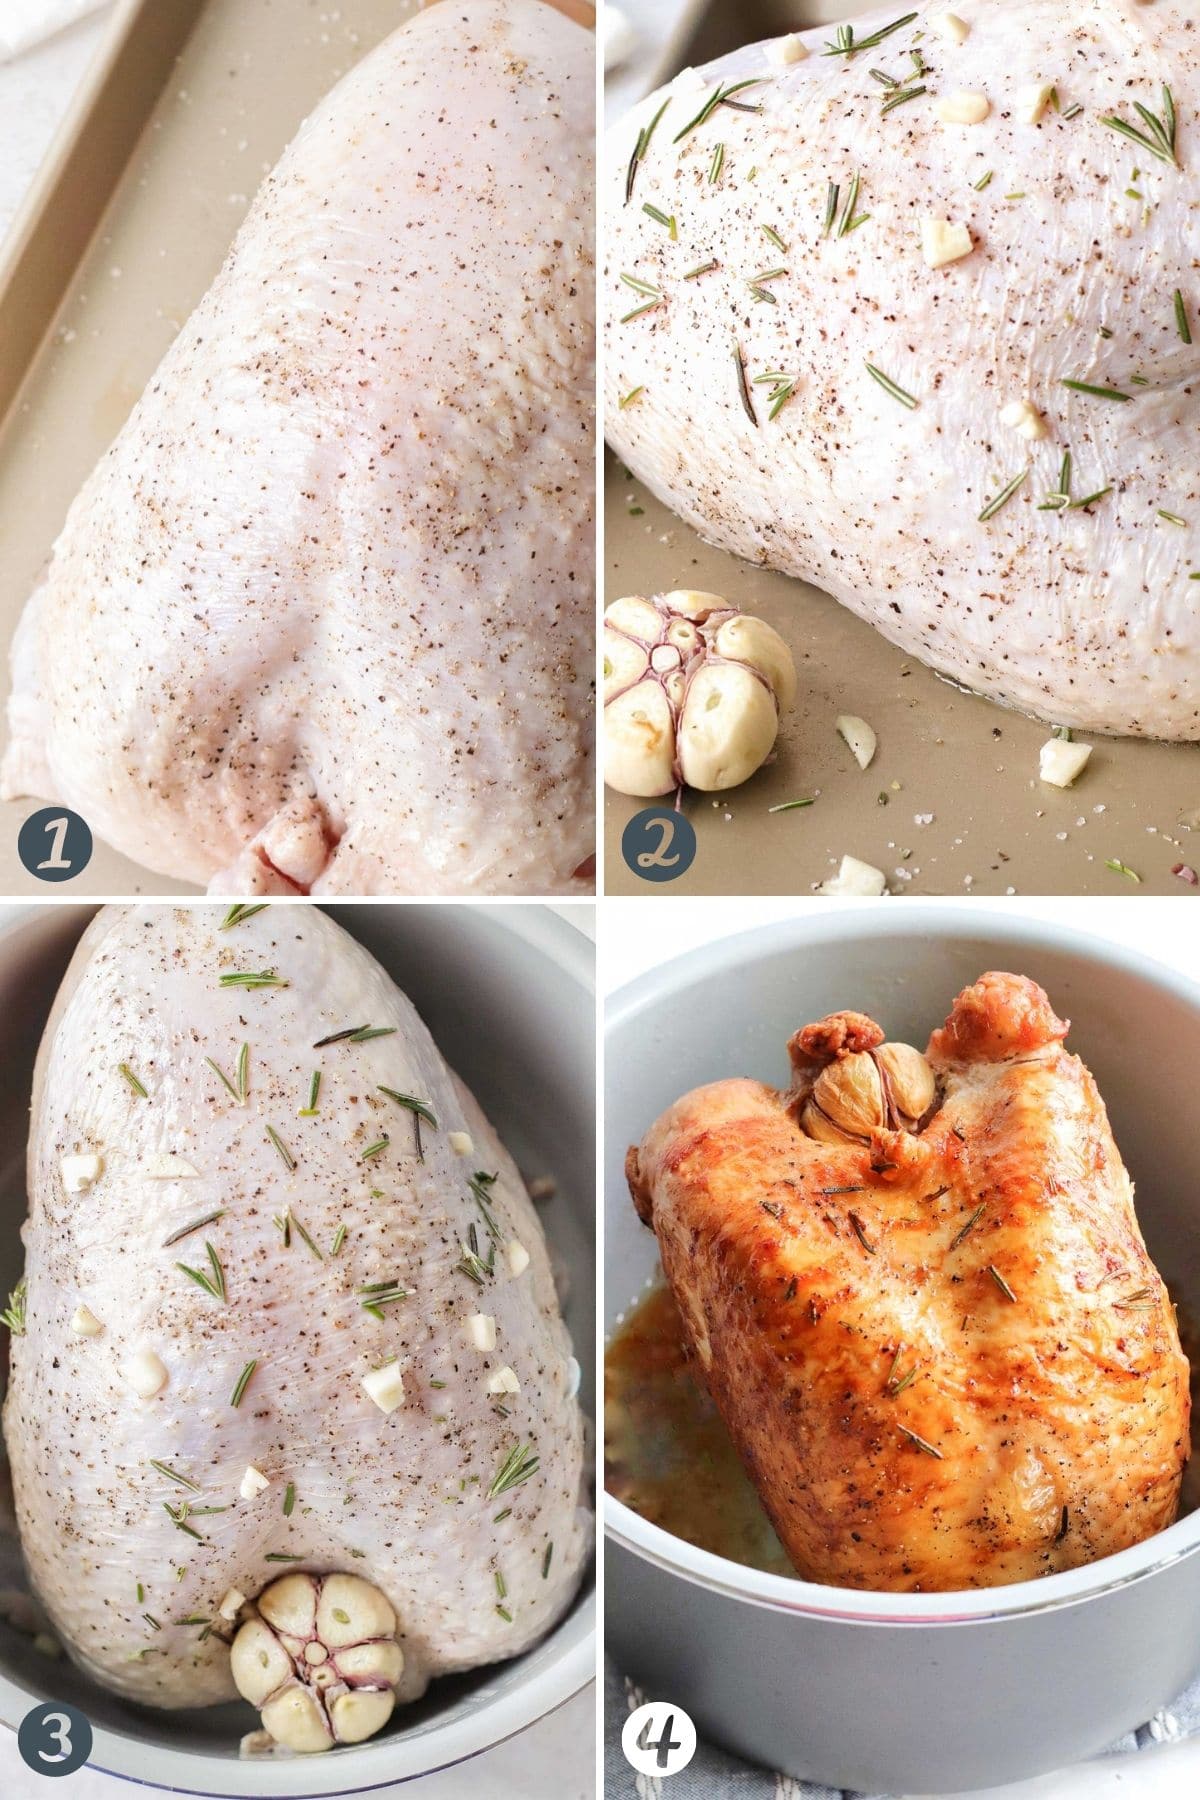 Steps for Making a Turkey Breast in the Air Fryer